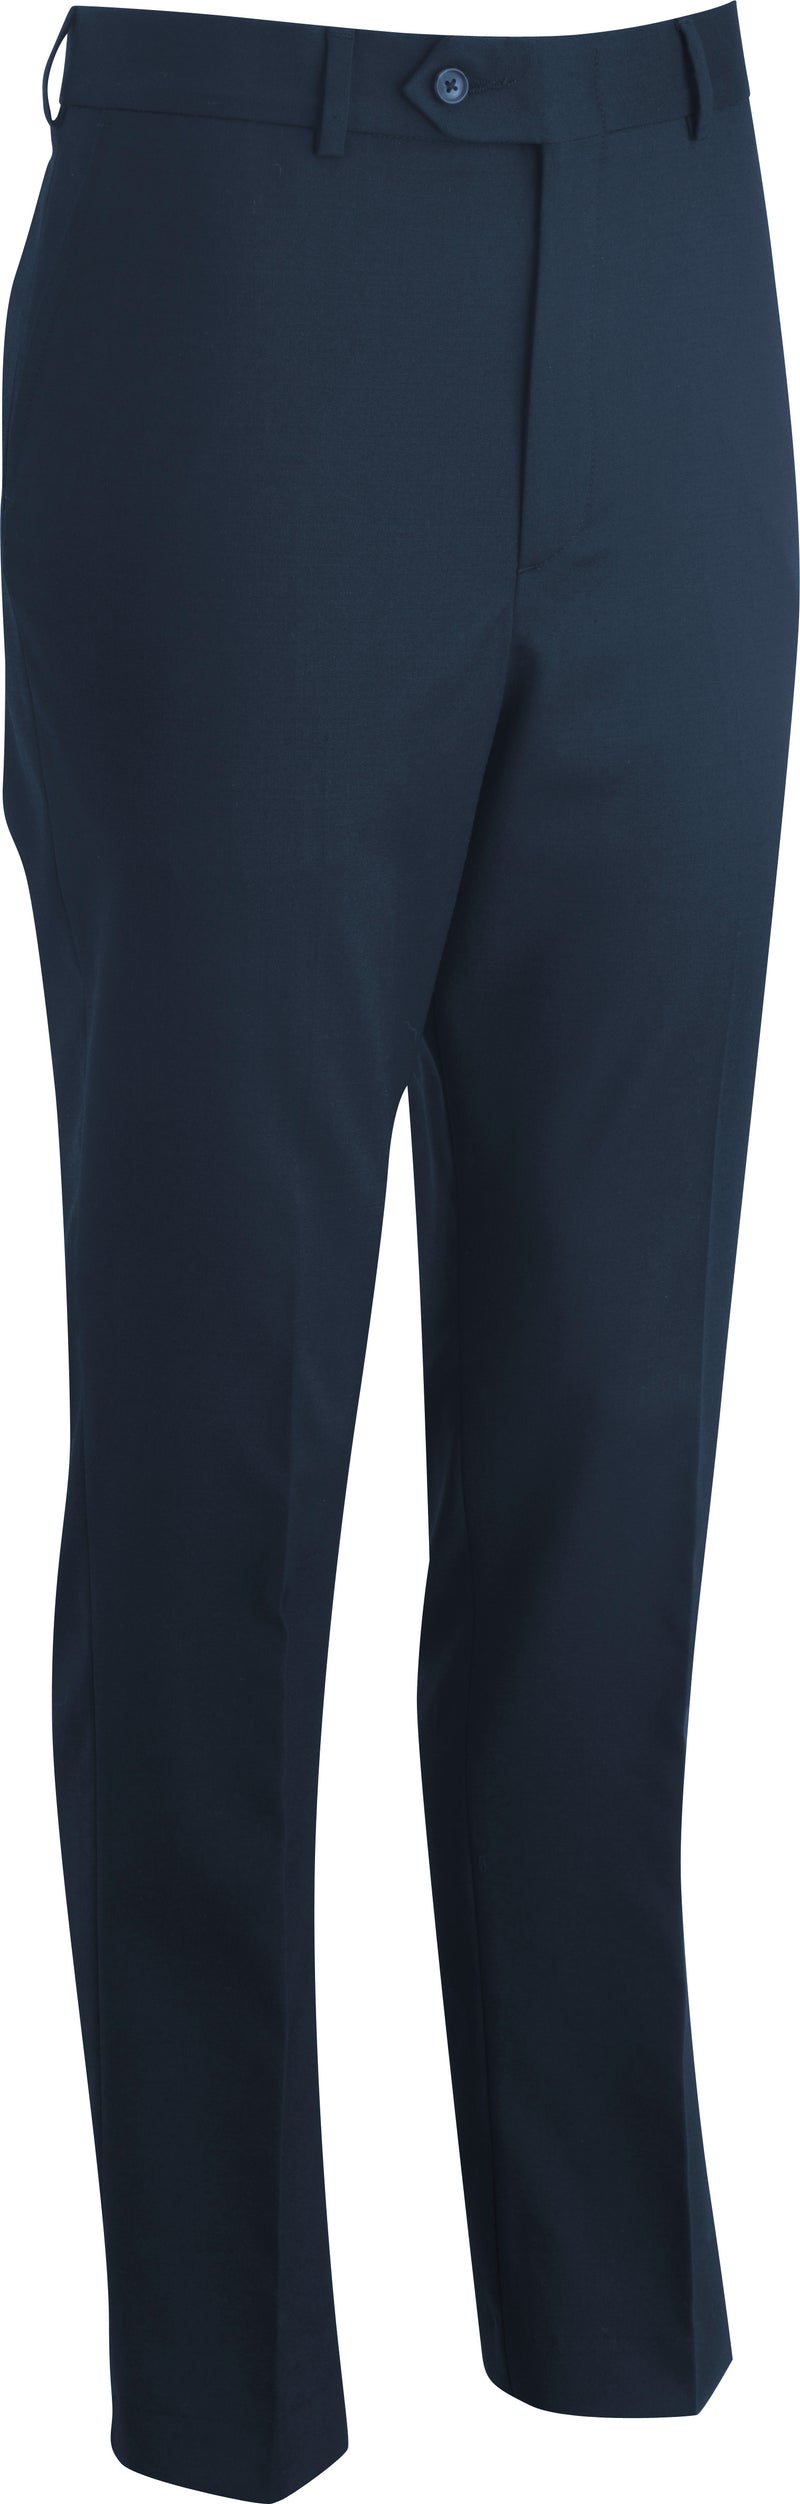 Edwards [2530] Men's Washable Flat-Front Dress Pant. Redwood & Ross Russel Collection. Live Chat For Bulk Discounts.